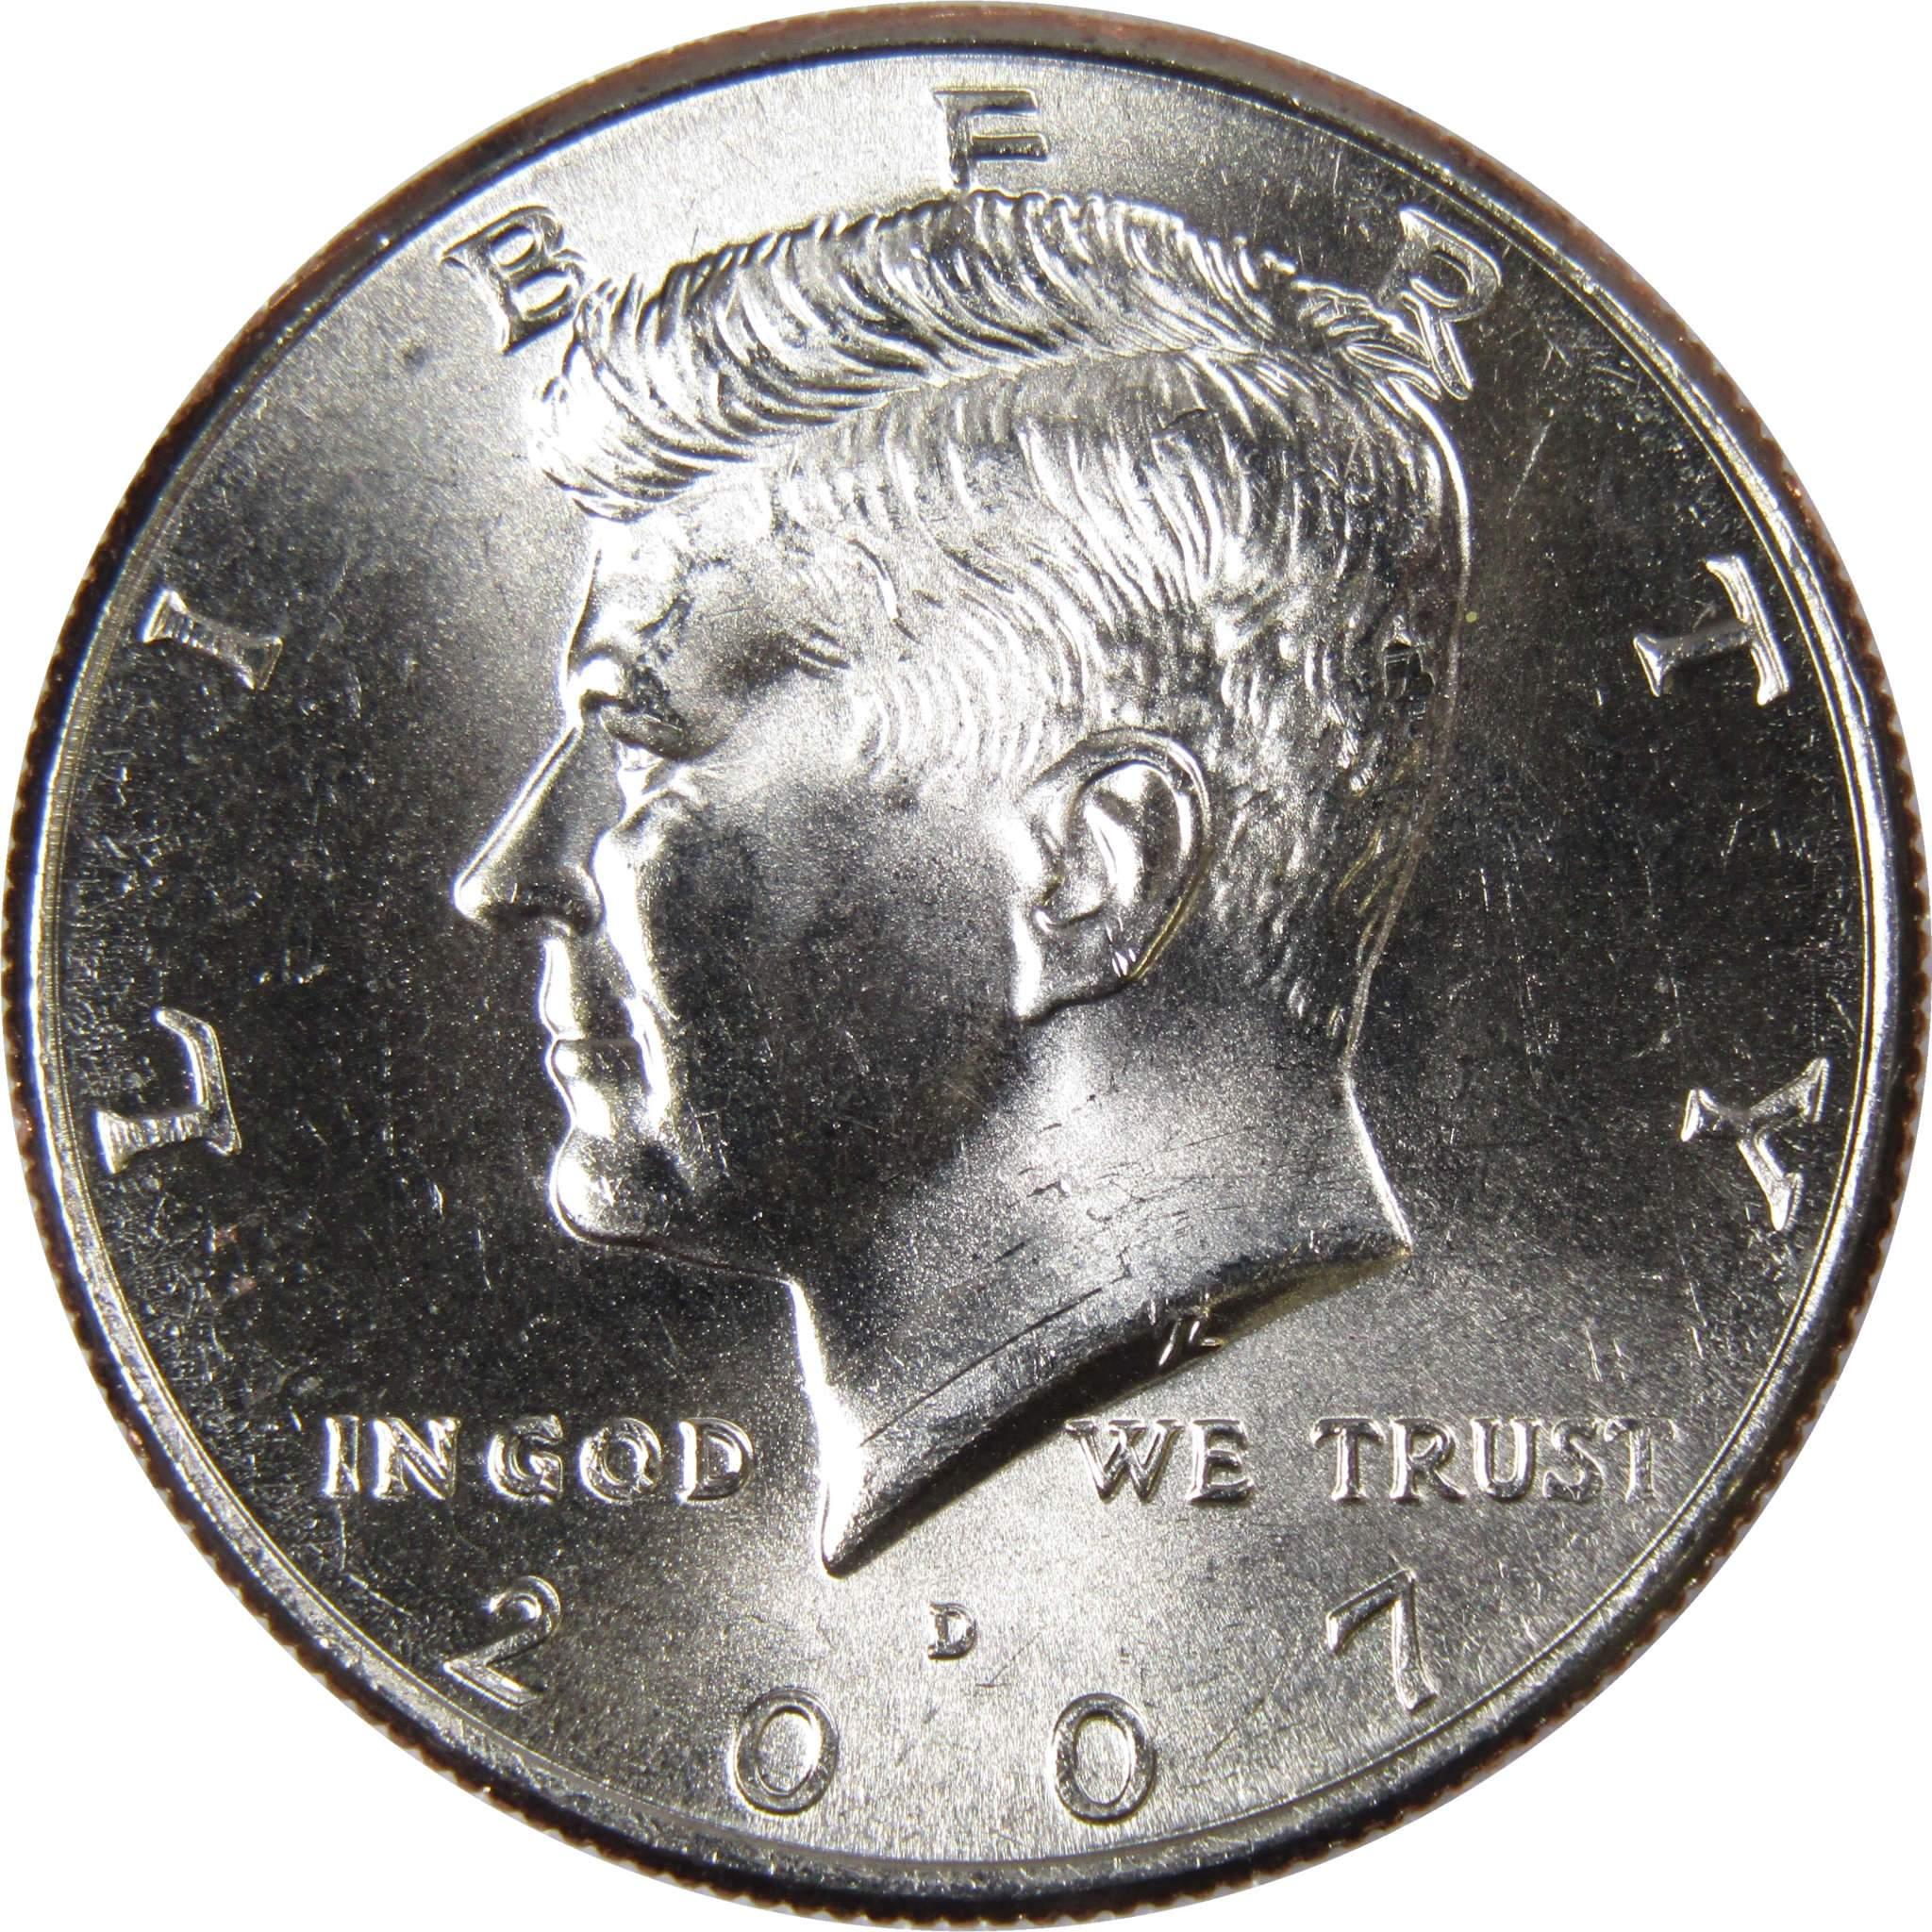 2007 D Kennedy Half Dollar BU Uncirculated Mint State 50c US Coin Collectible